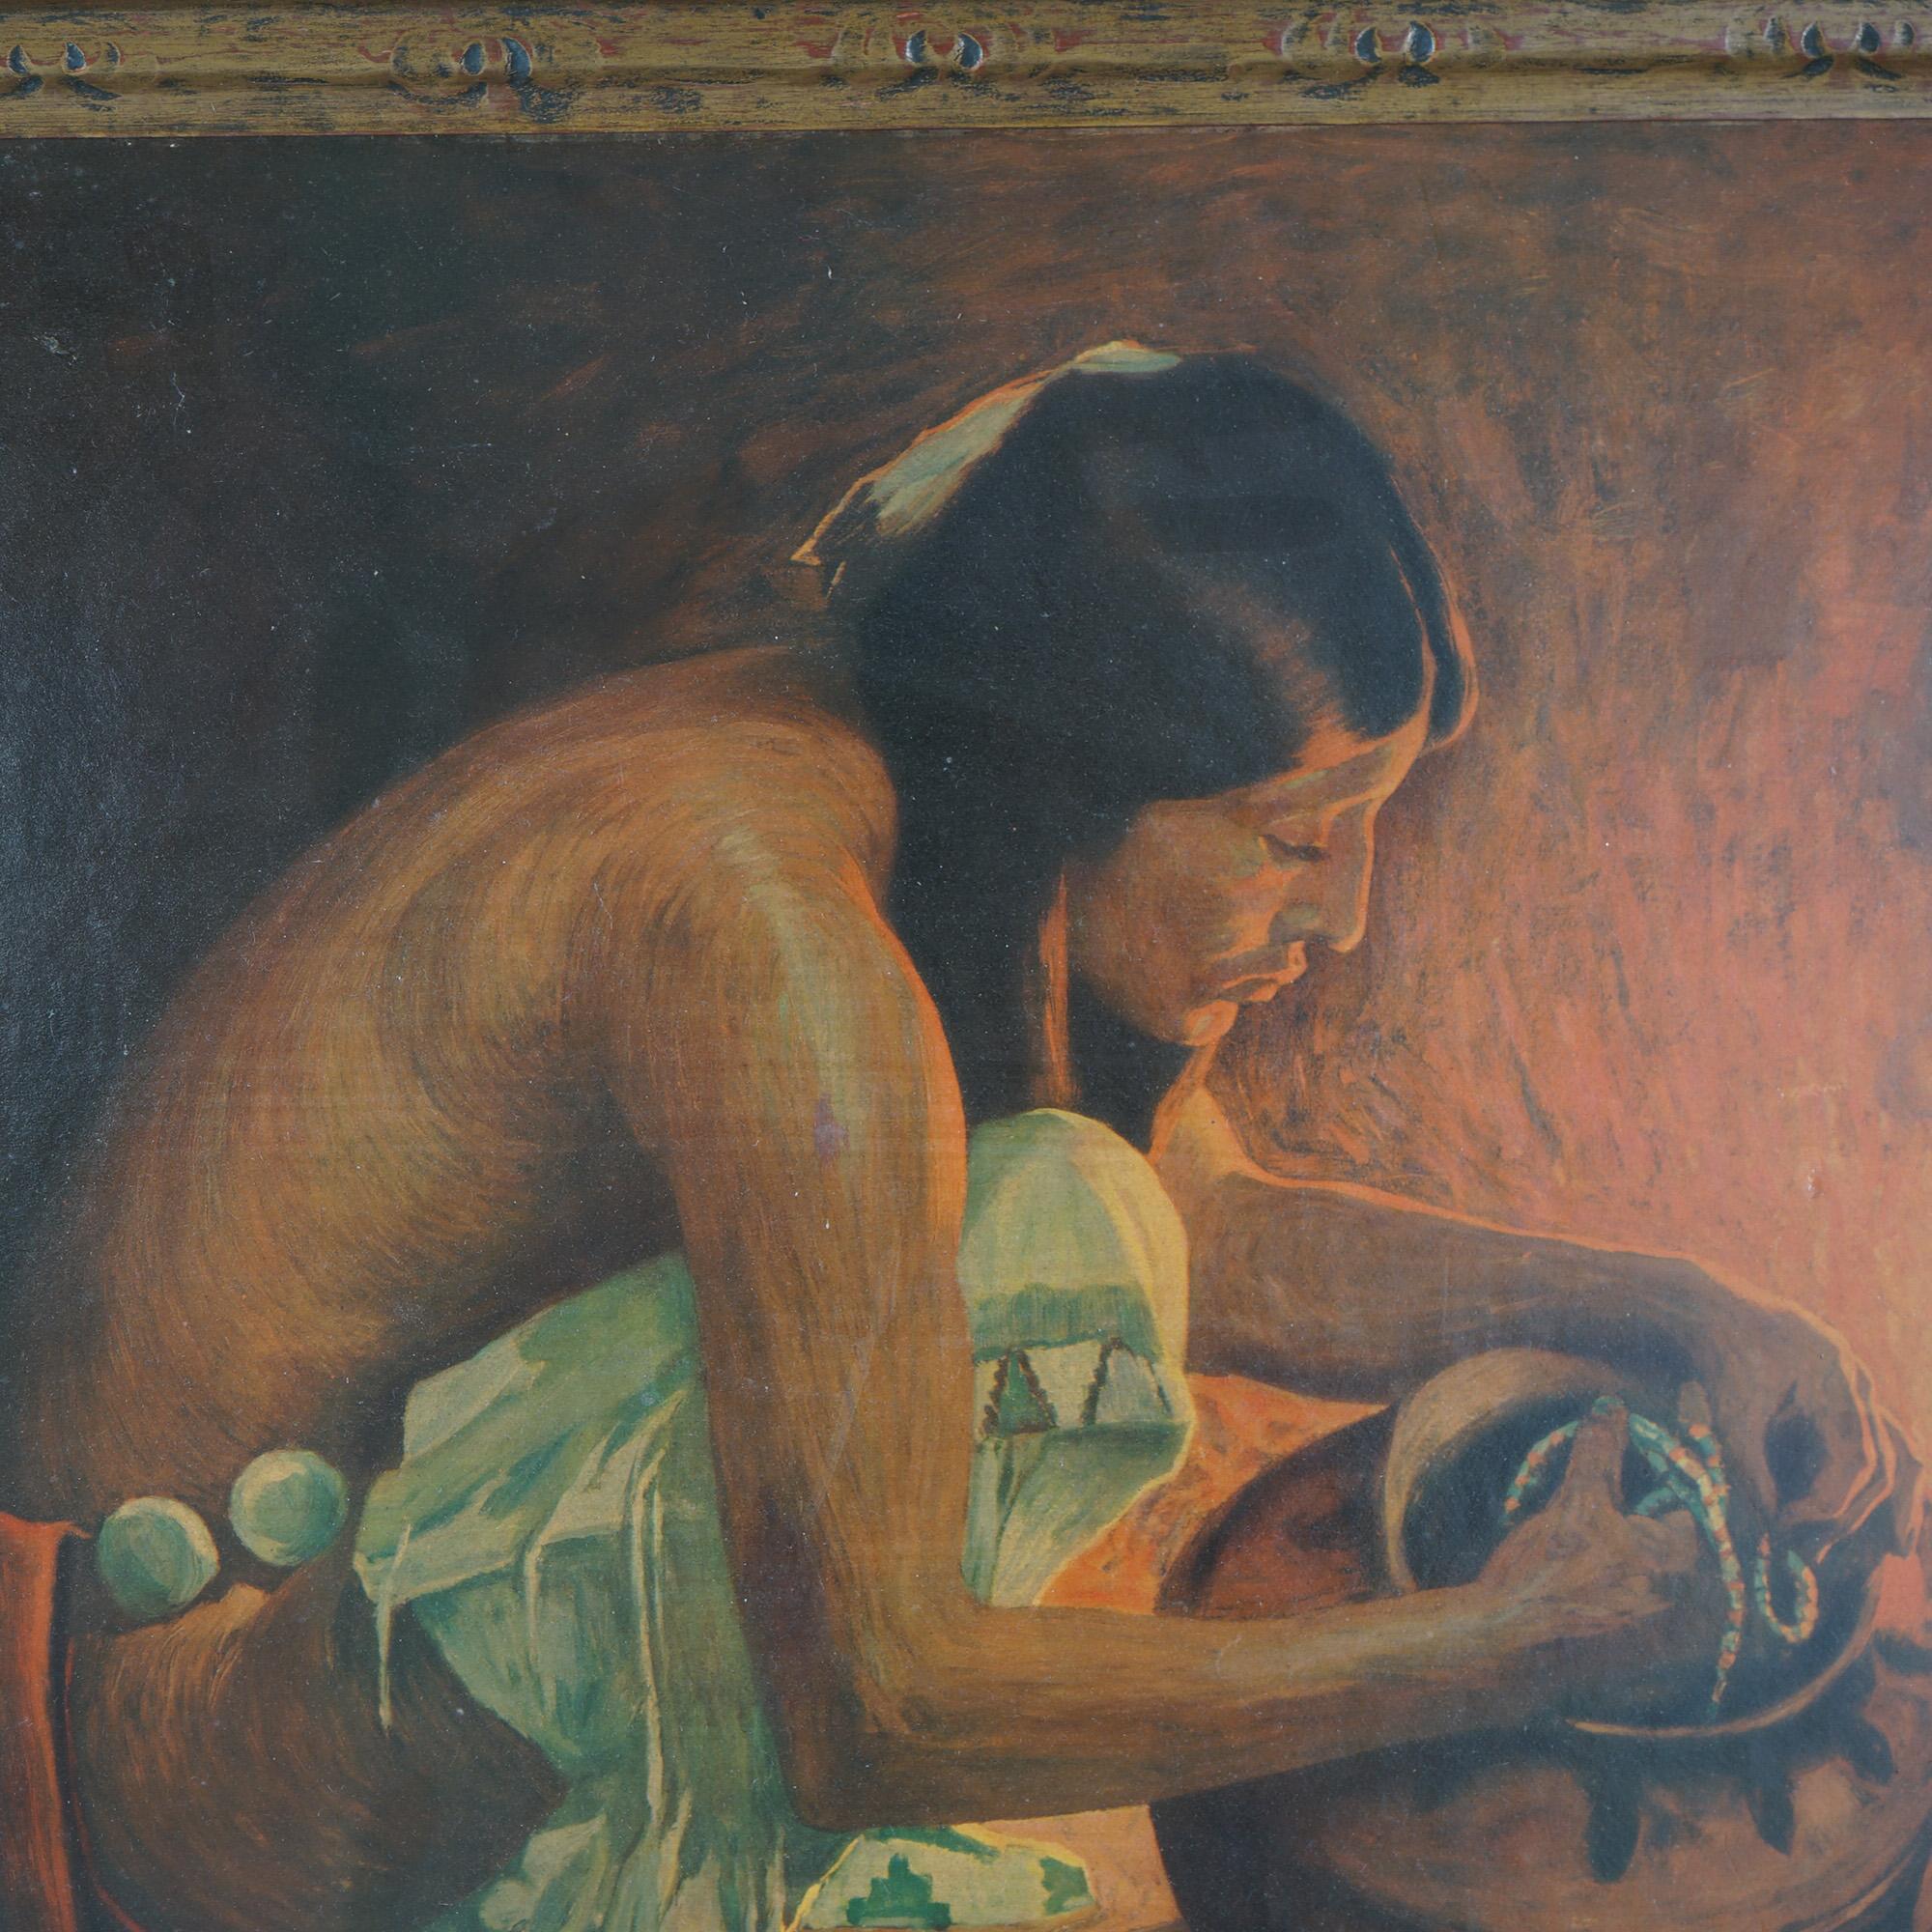 An antique Arts & Crafts Navajo painting by E. I. Couse titled “Treasure Jar” offers oil on panel scene with figure with a pottery jar and jewelry, signed, c1930

Measures - 26